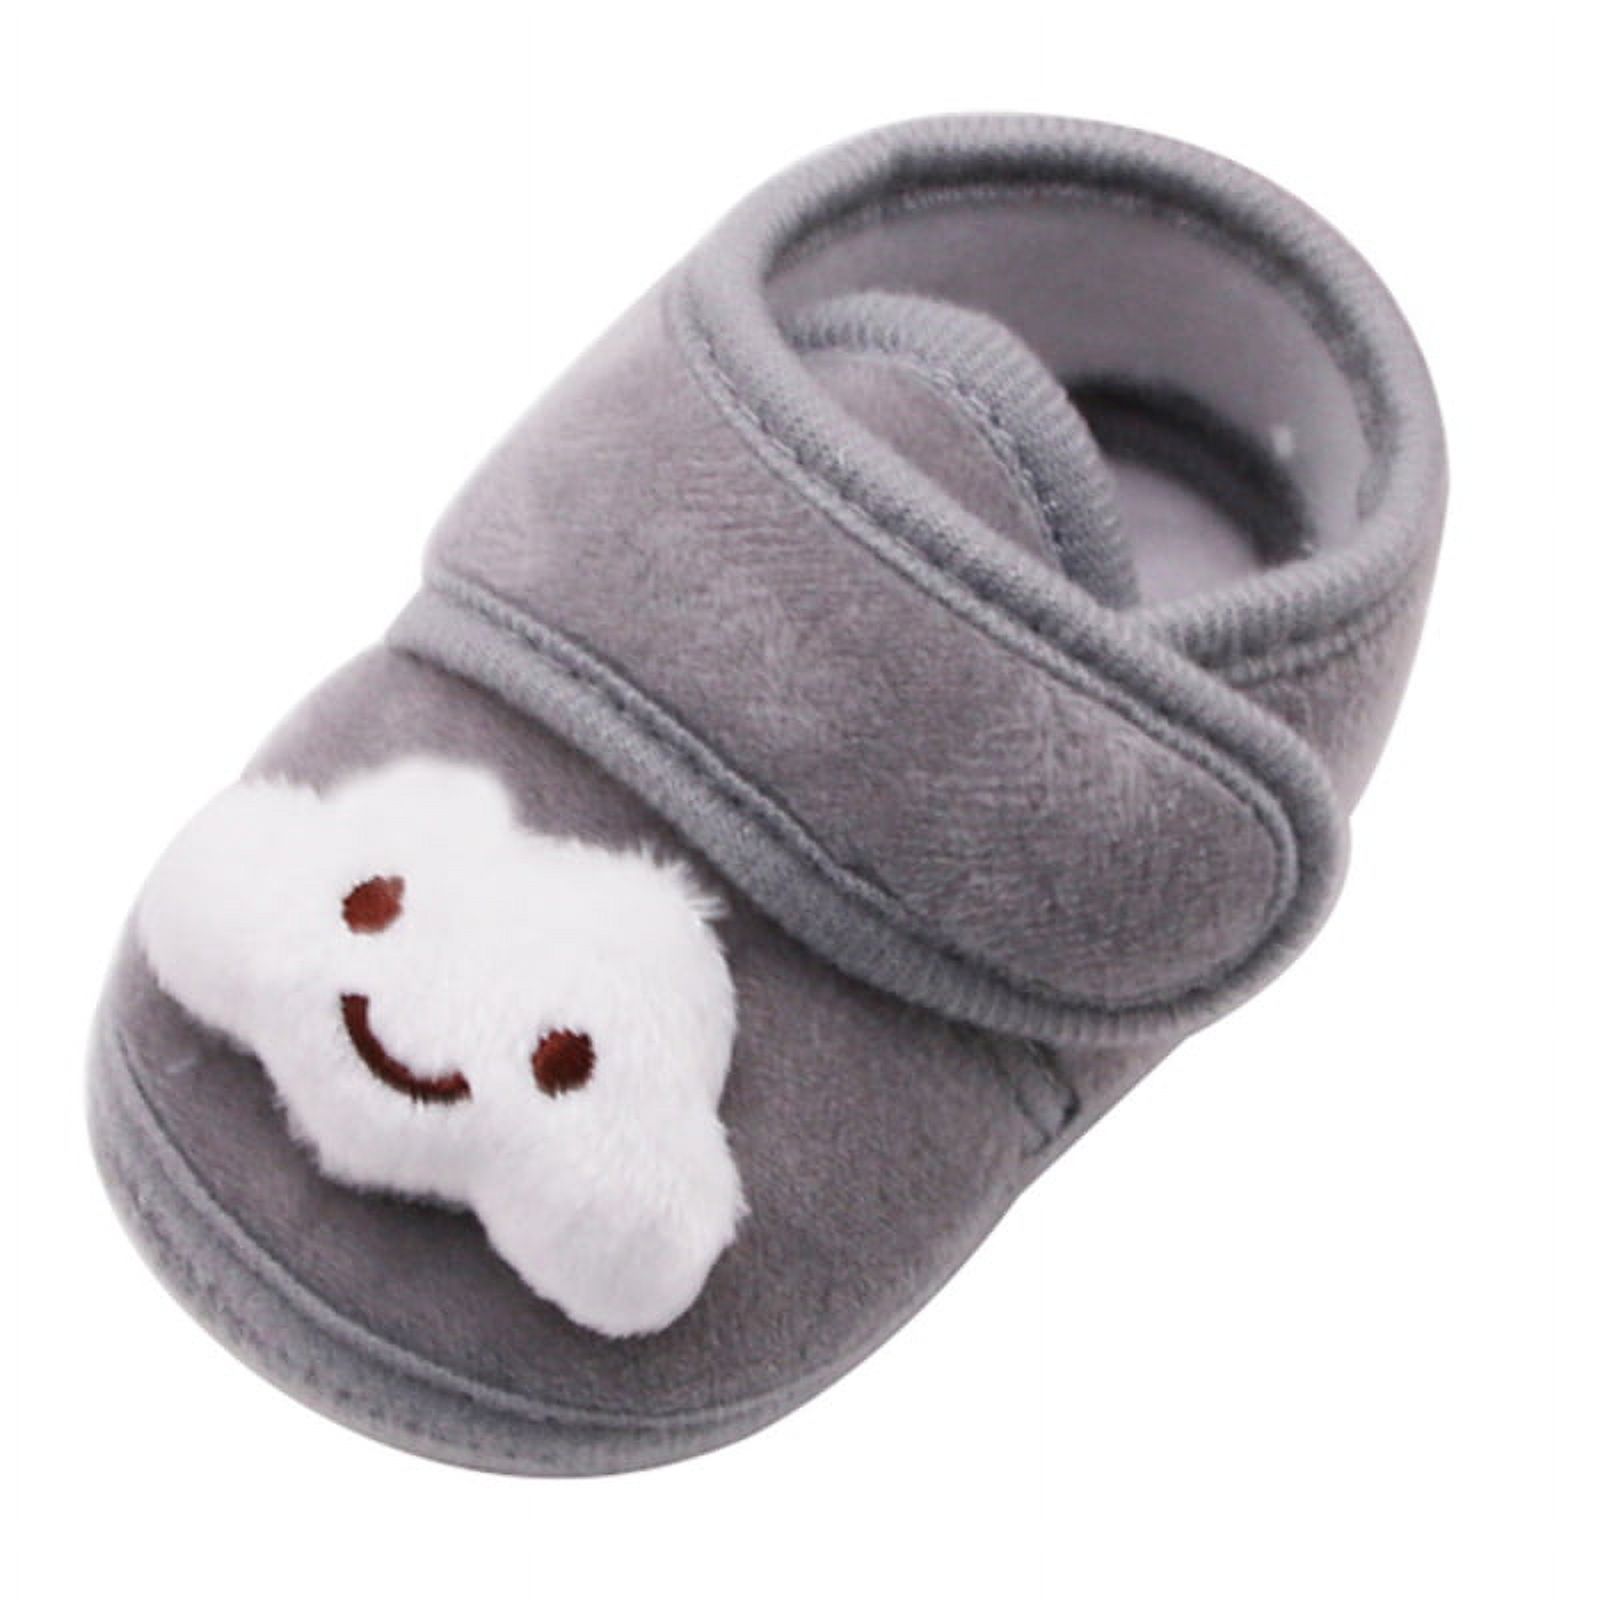 Infant Baby Boys Girls Slipper Soft Sole Non Skid Sneaker Moccasins Toddler First Walker Crib House Shoes - image 1 of 7